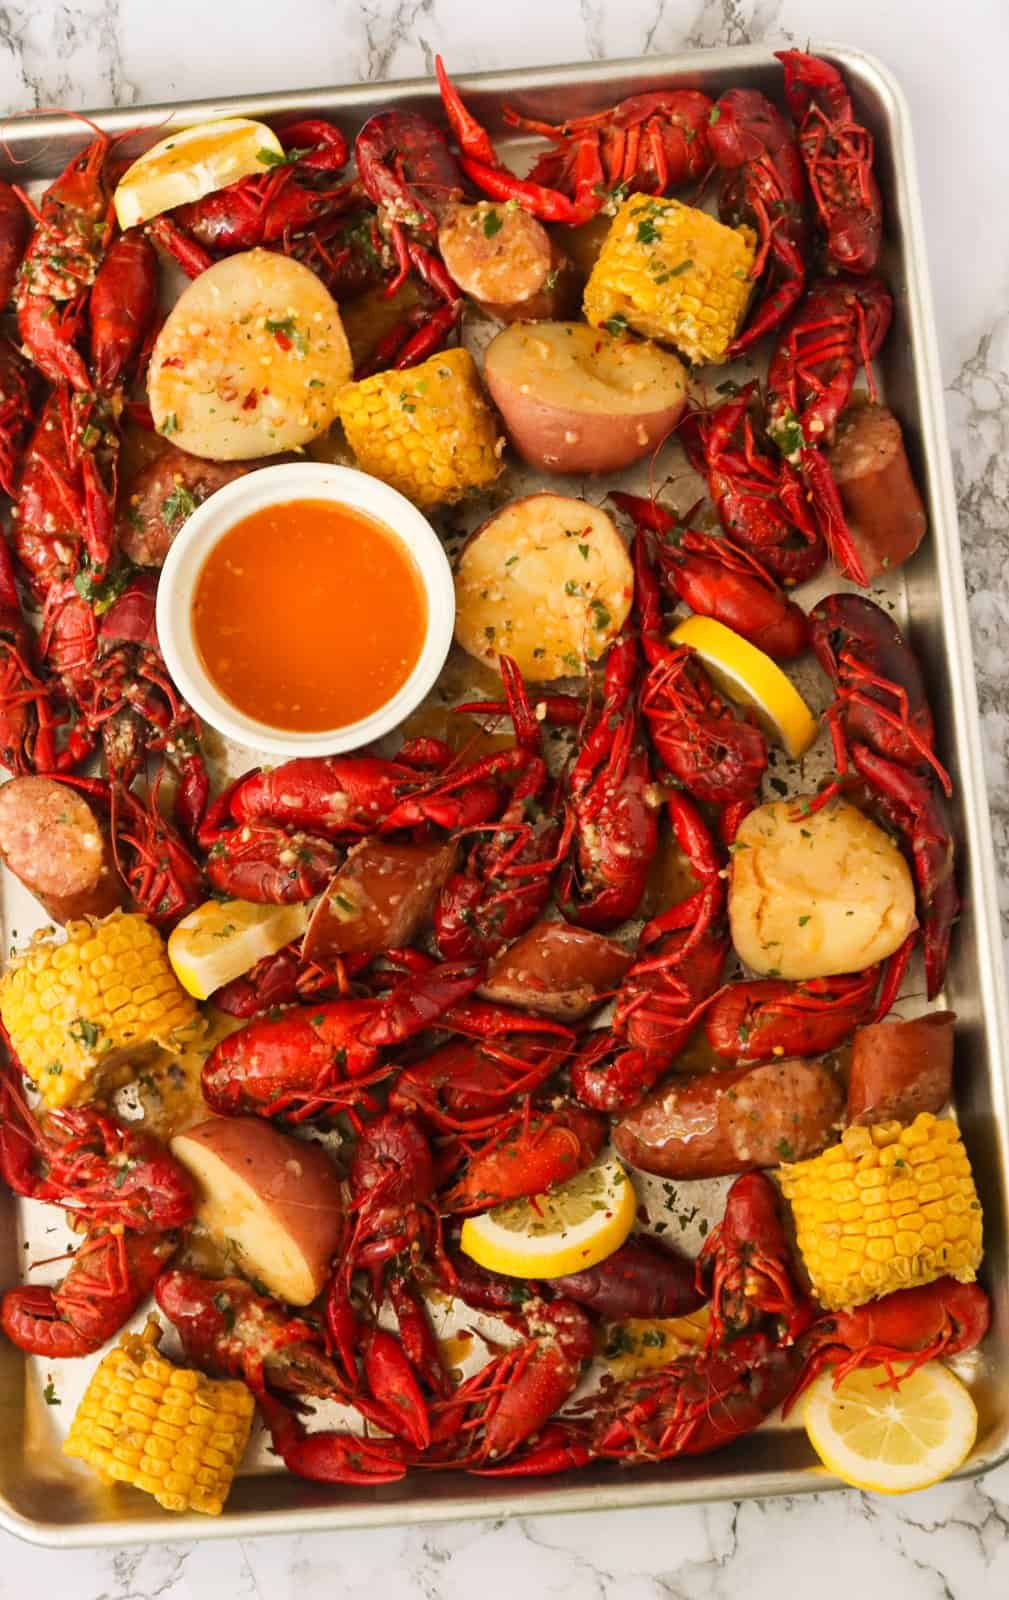 Field to Feast: Blackened Crawfish with Spicy Bacon Butter on